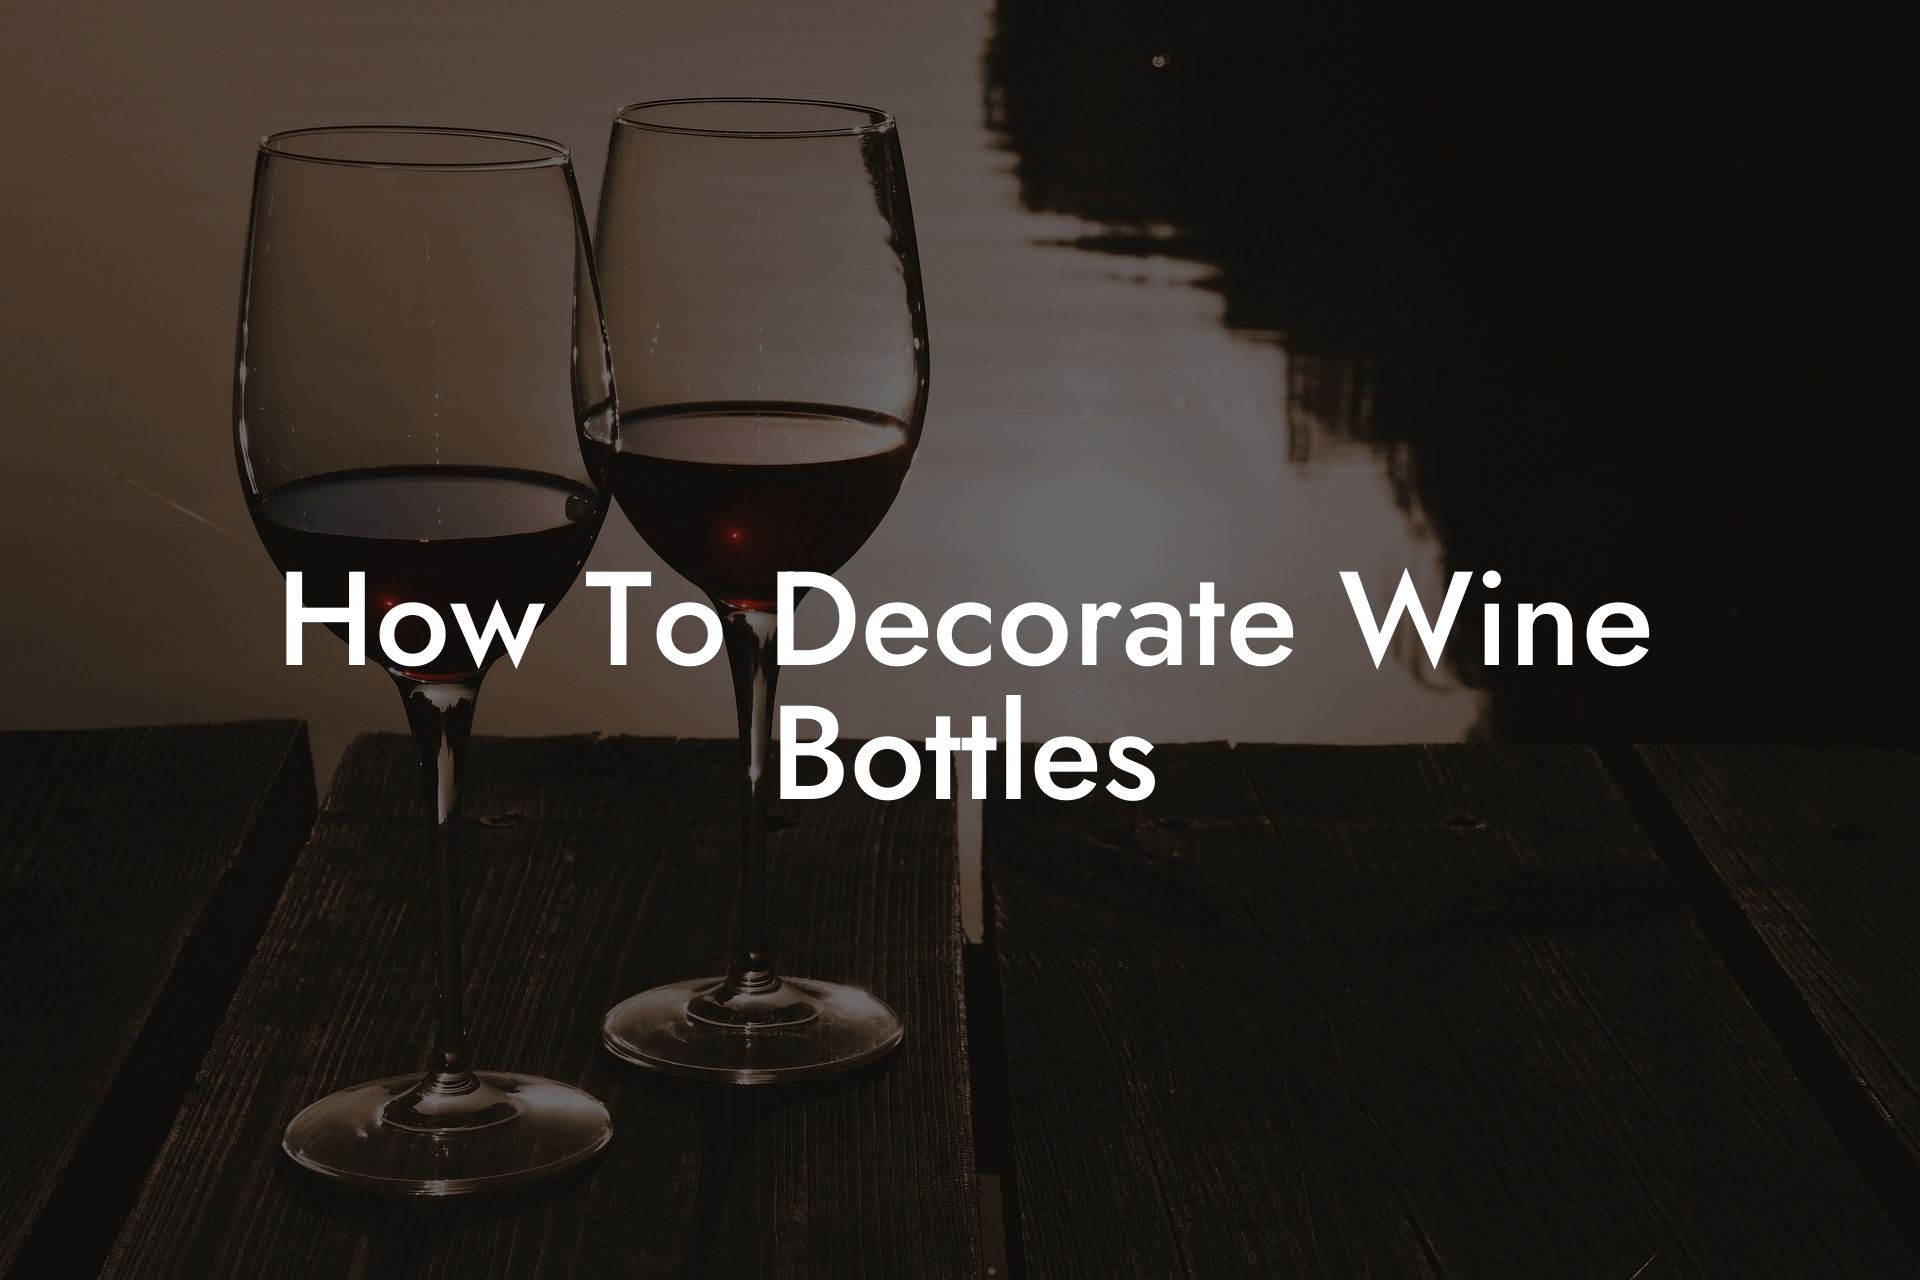 How To Decorate Wine Bottles